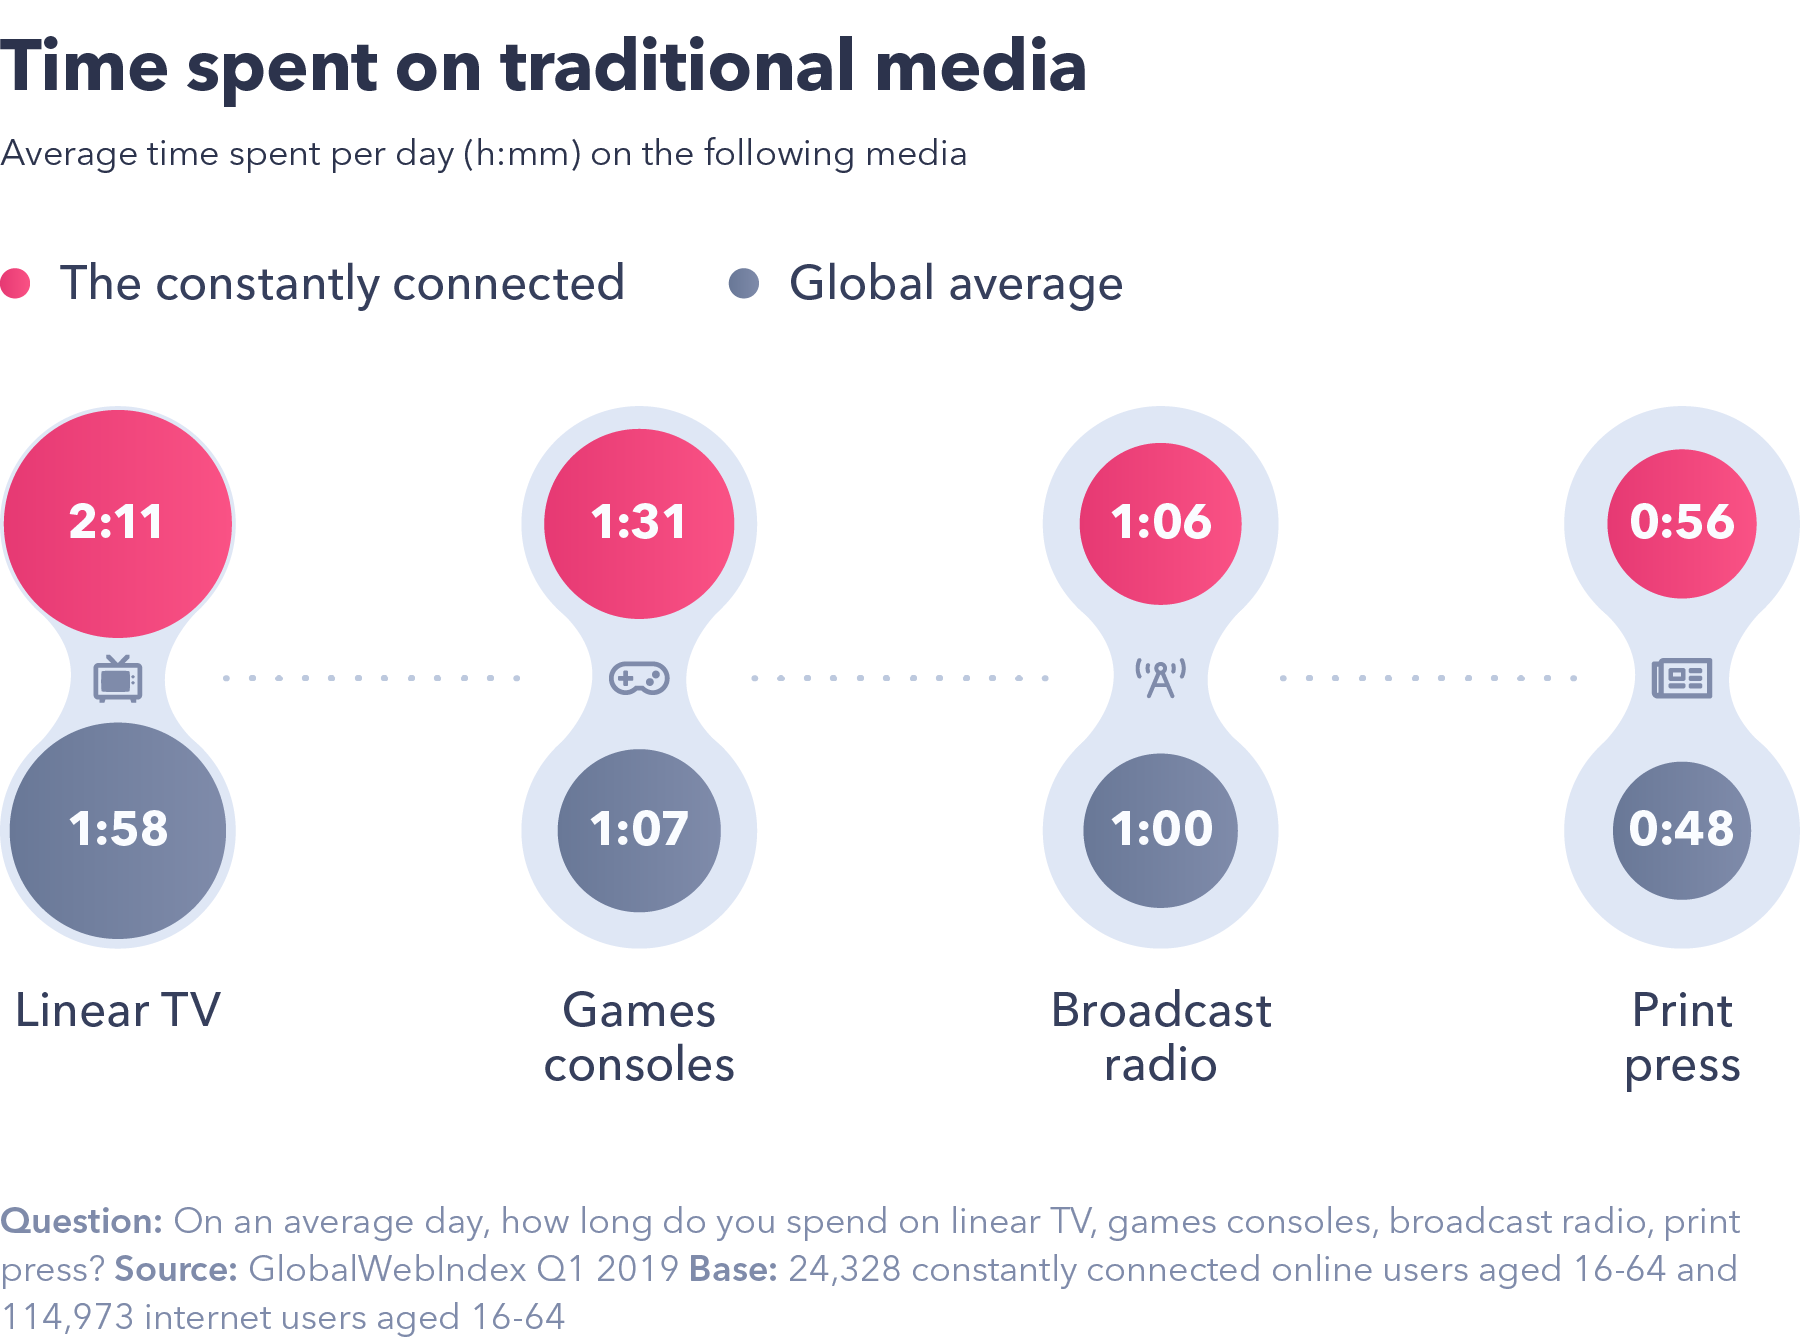 Time spent on traditional media